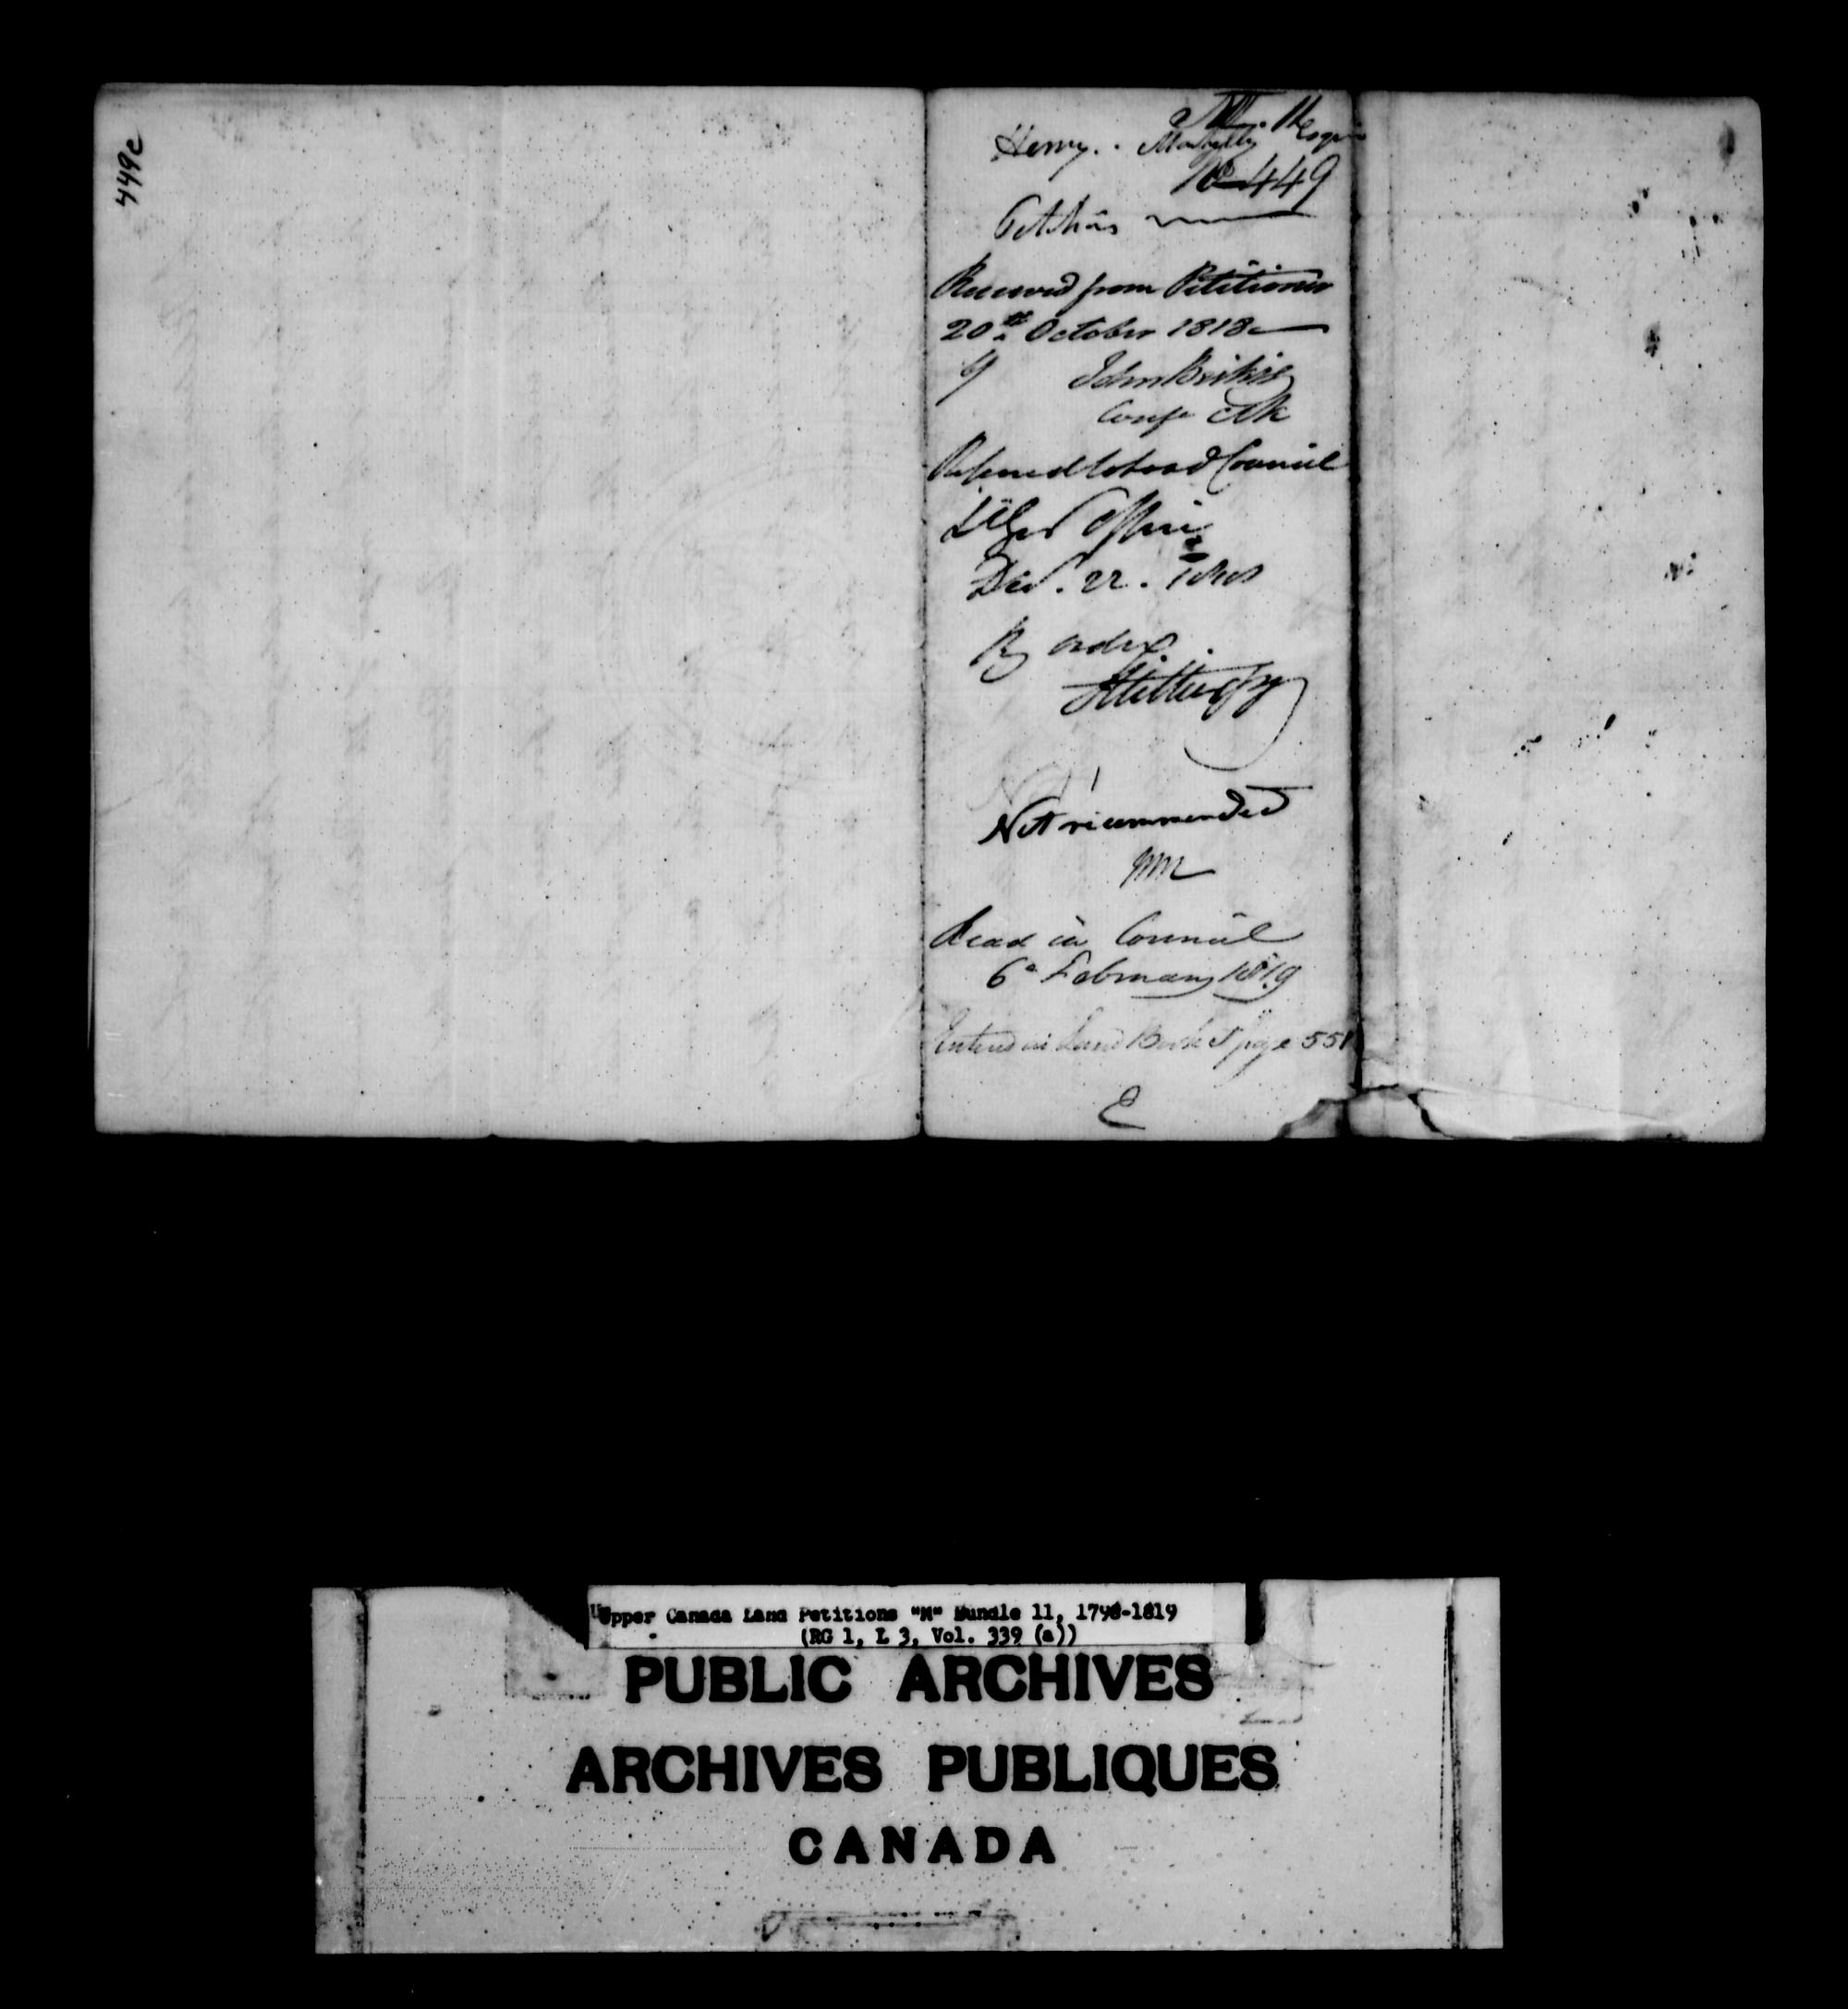 Title: Upper Canada Land Petitions (1763-1865) - Mikan Number: 205131 - Microform: c-2200